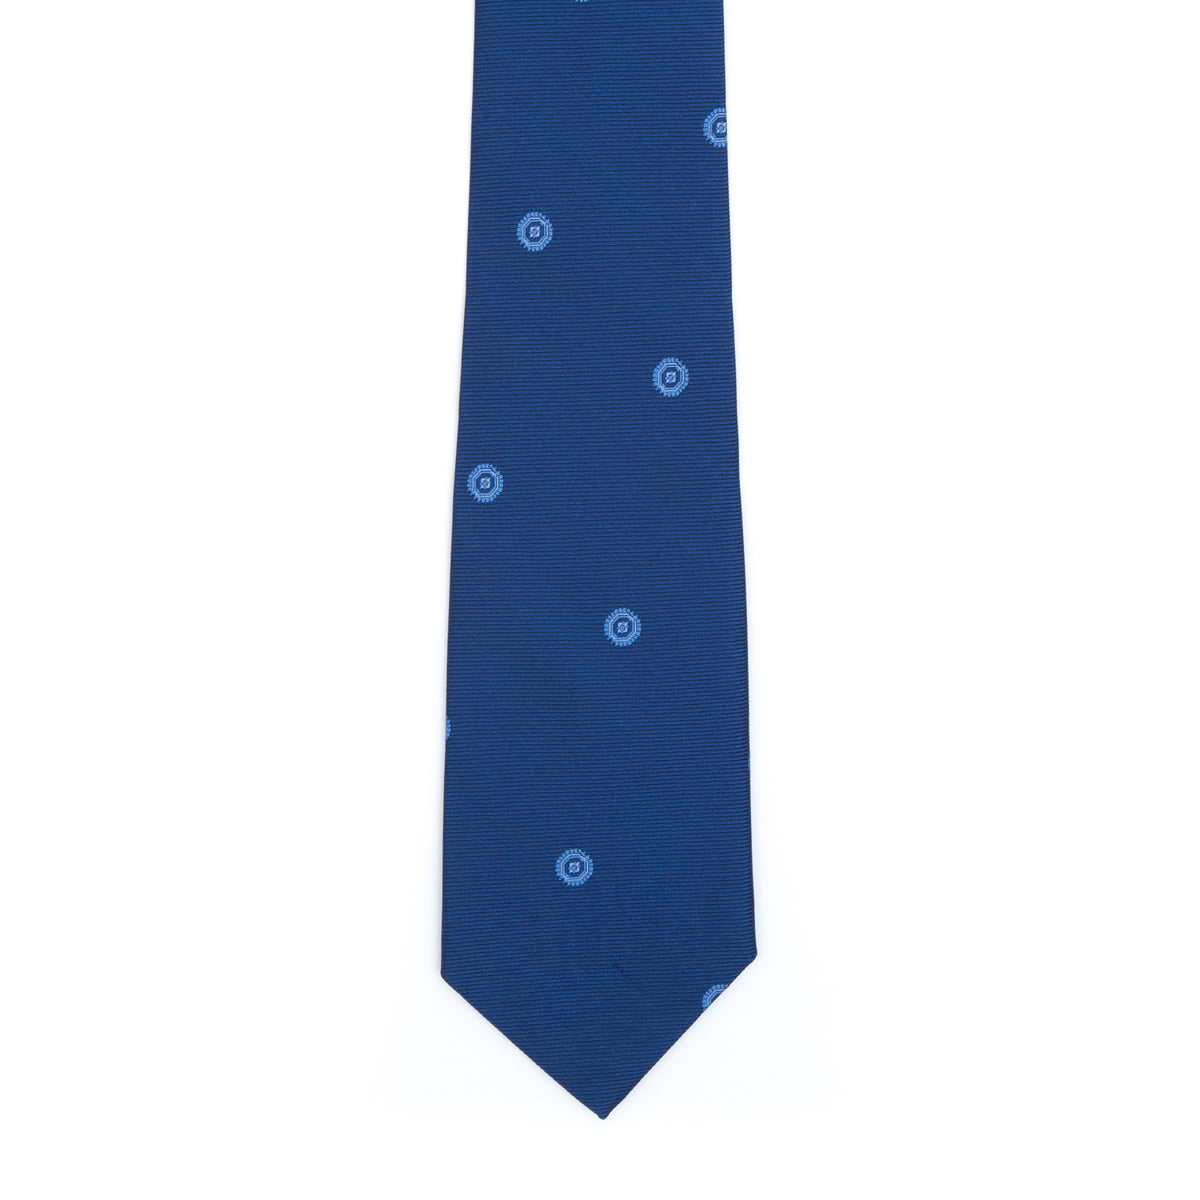 French blue speckled tie